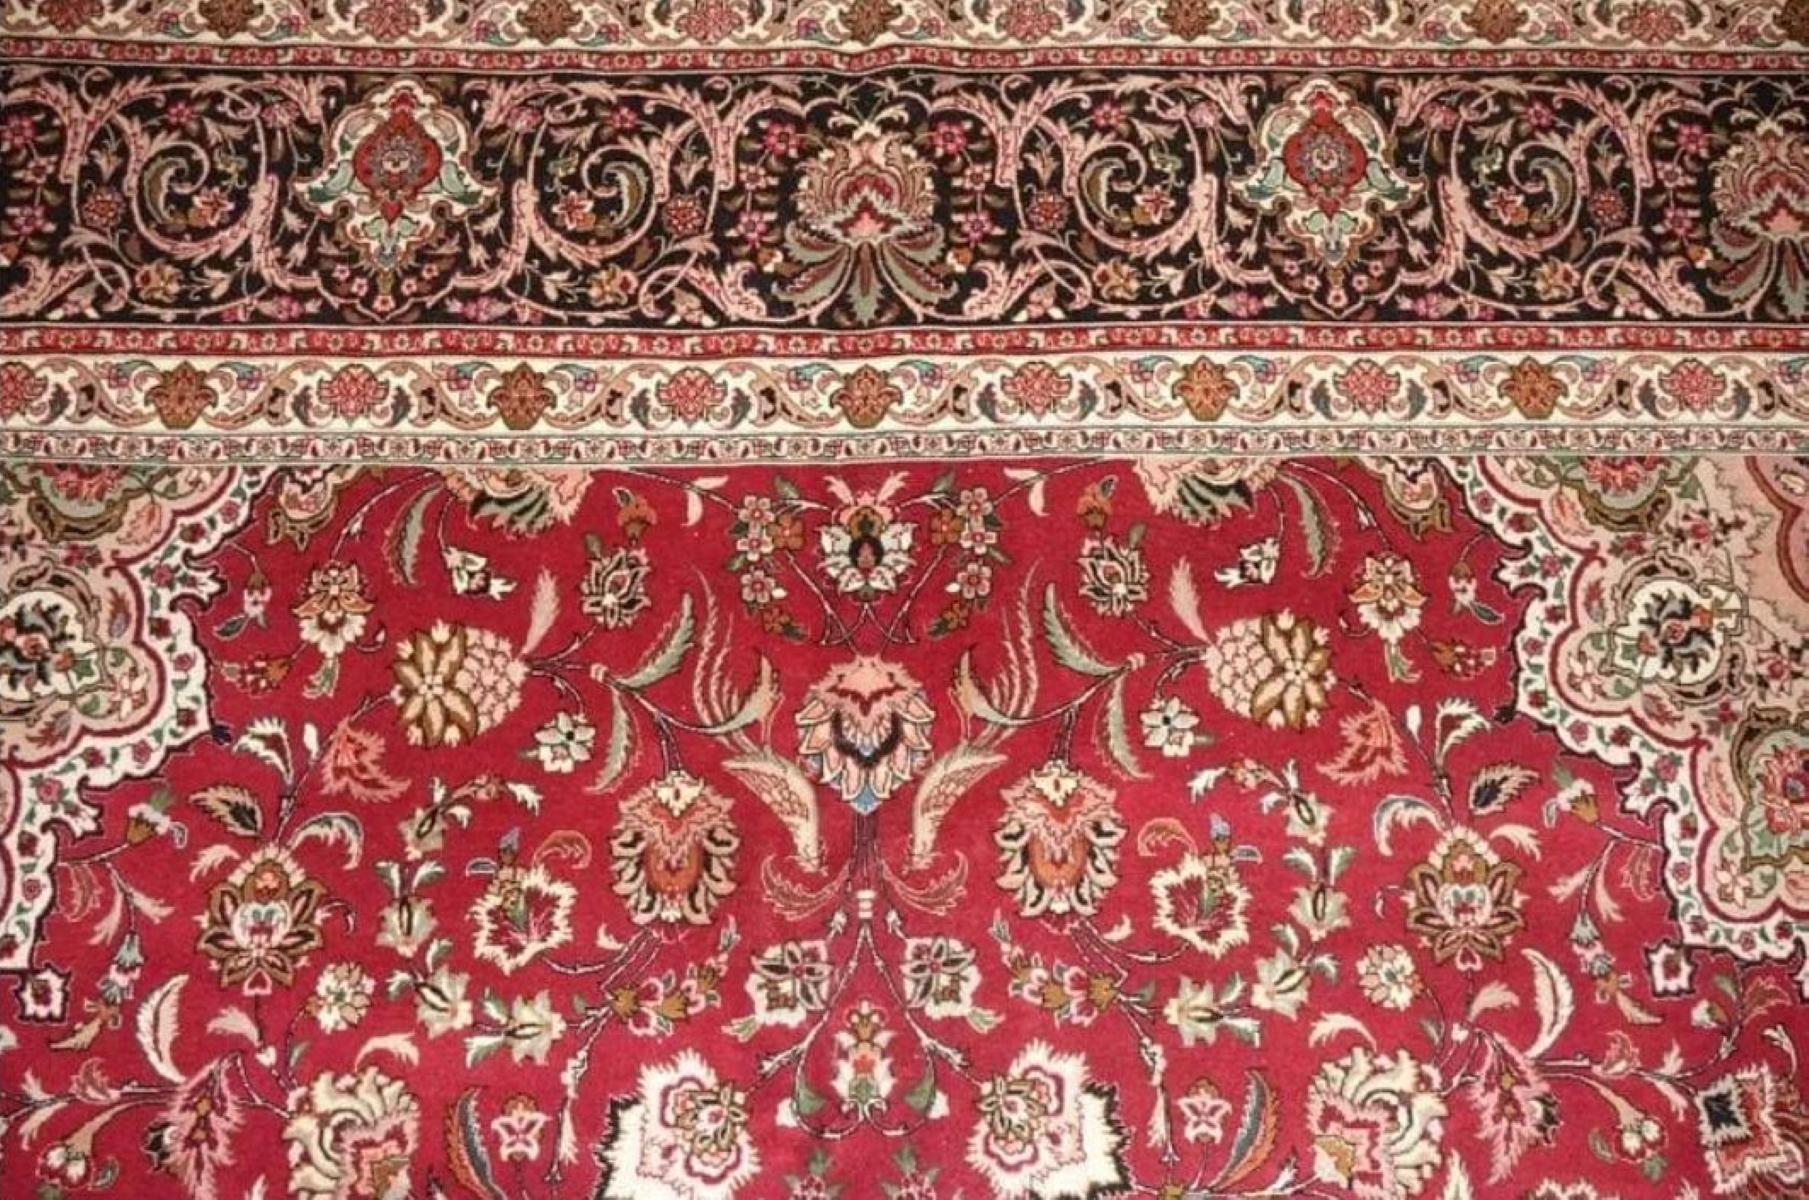 Very fine Persian Tabriz Silk & Wool Rug - 10' x 13.3' In Excellent Condition For Sale In Newmanstown, PA